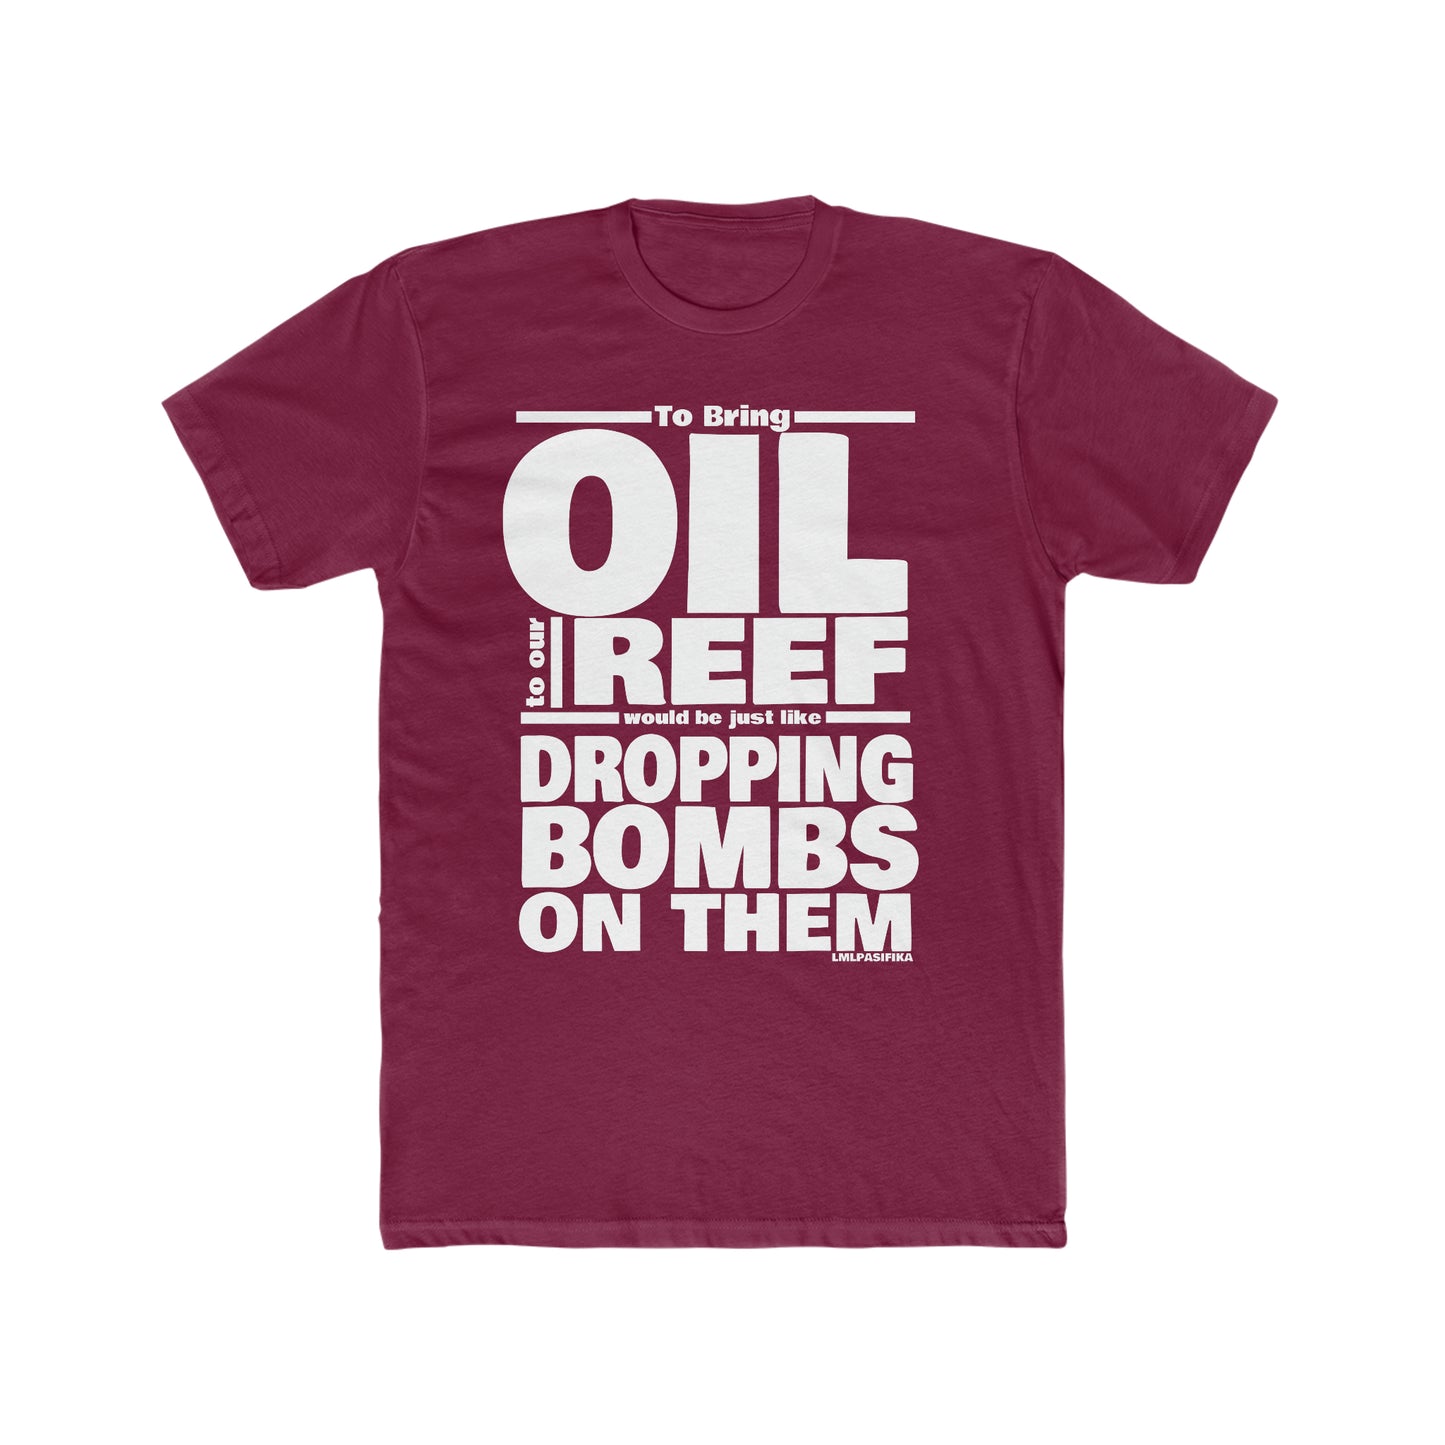 To Bring Oil To Our Reef Would Be Just Like Dropping Bombs On Them Climate Justice Tee-Heliaki